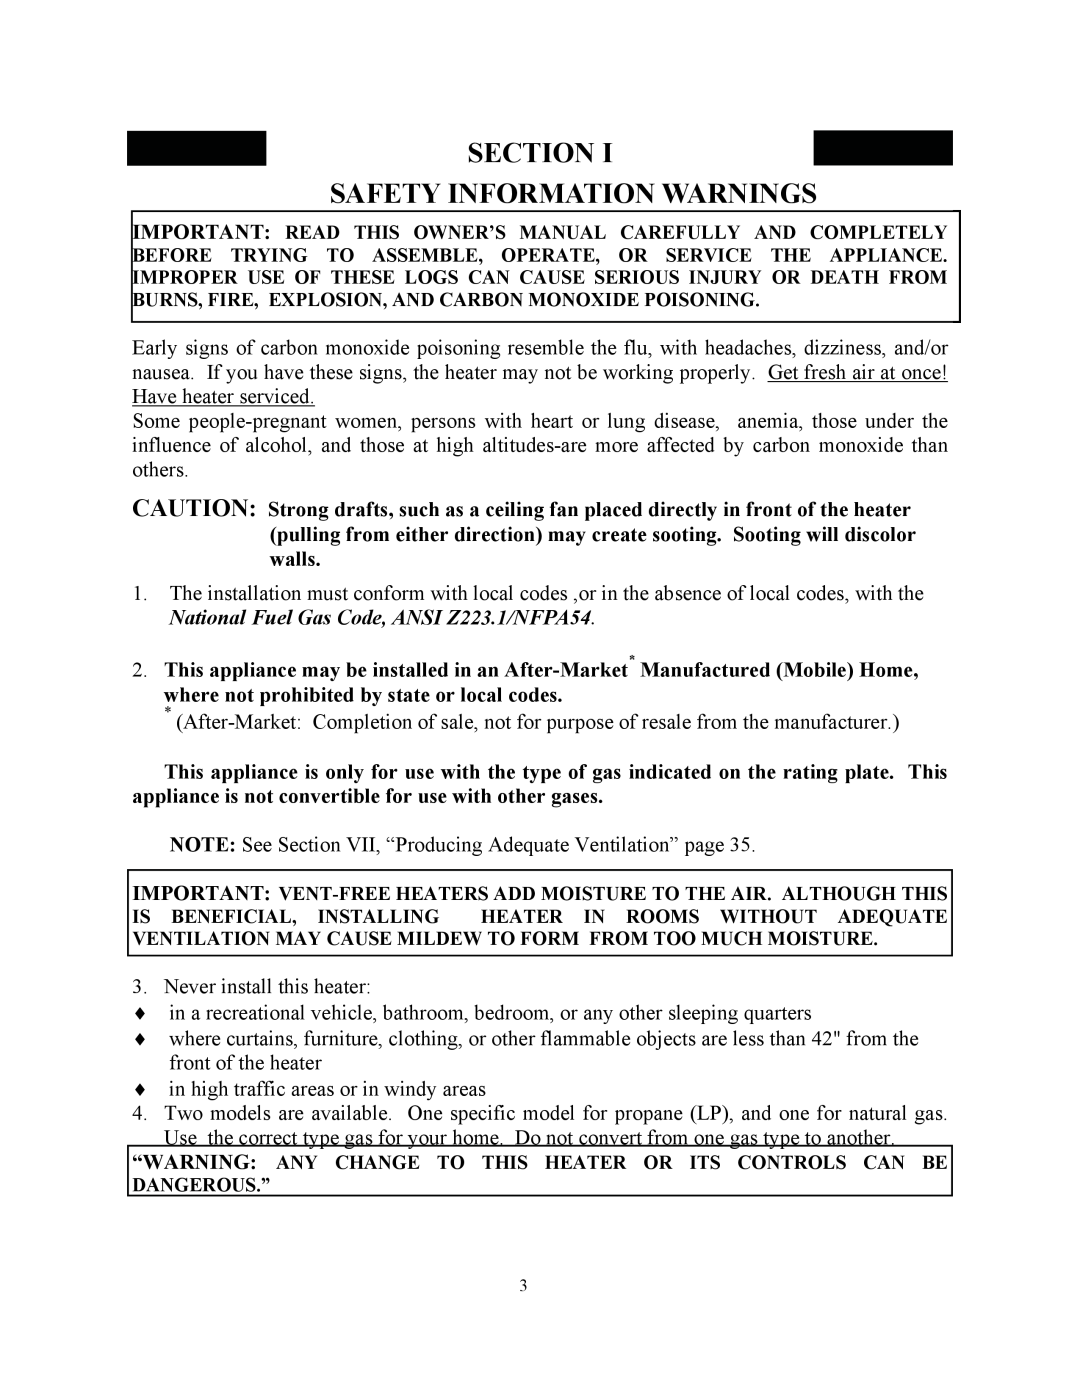 New Buck Corporation 34 manual Section I Safety Information Warnings 